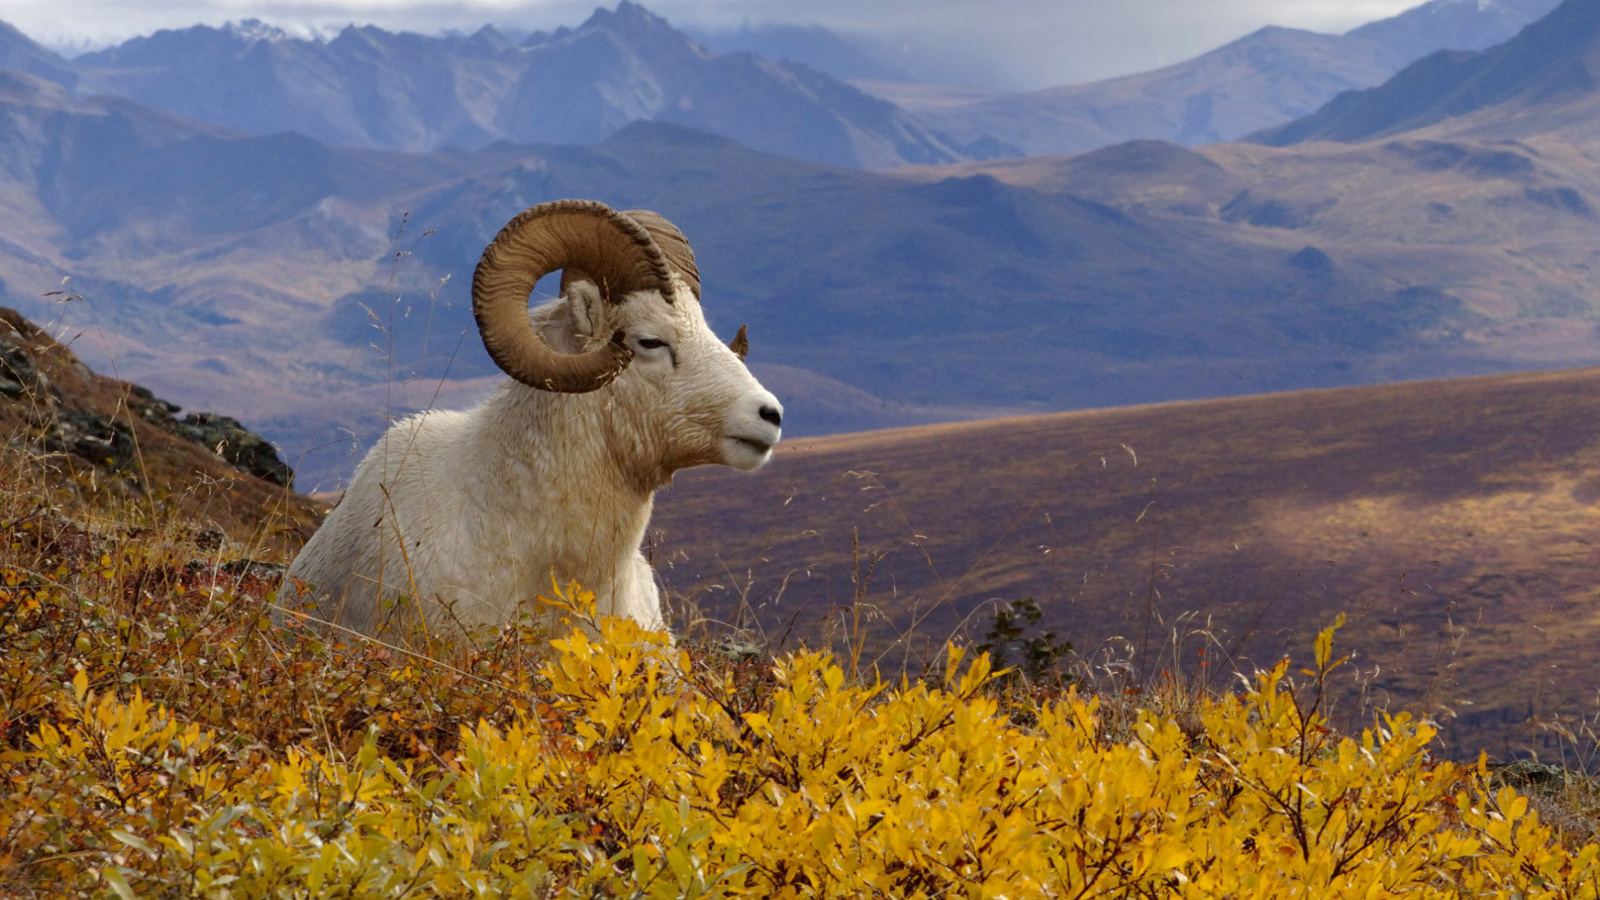 Goat in High Mountains wallpaper 1600x900